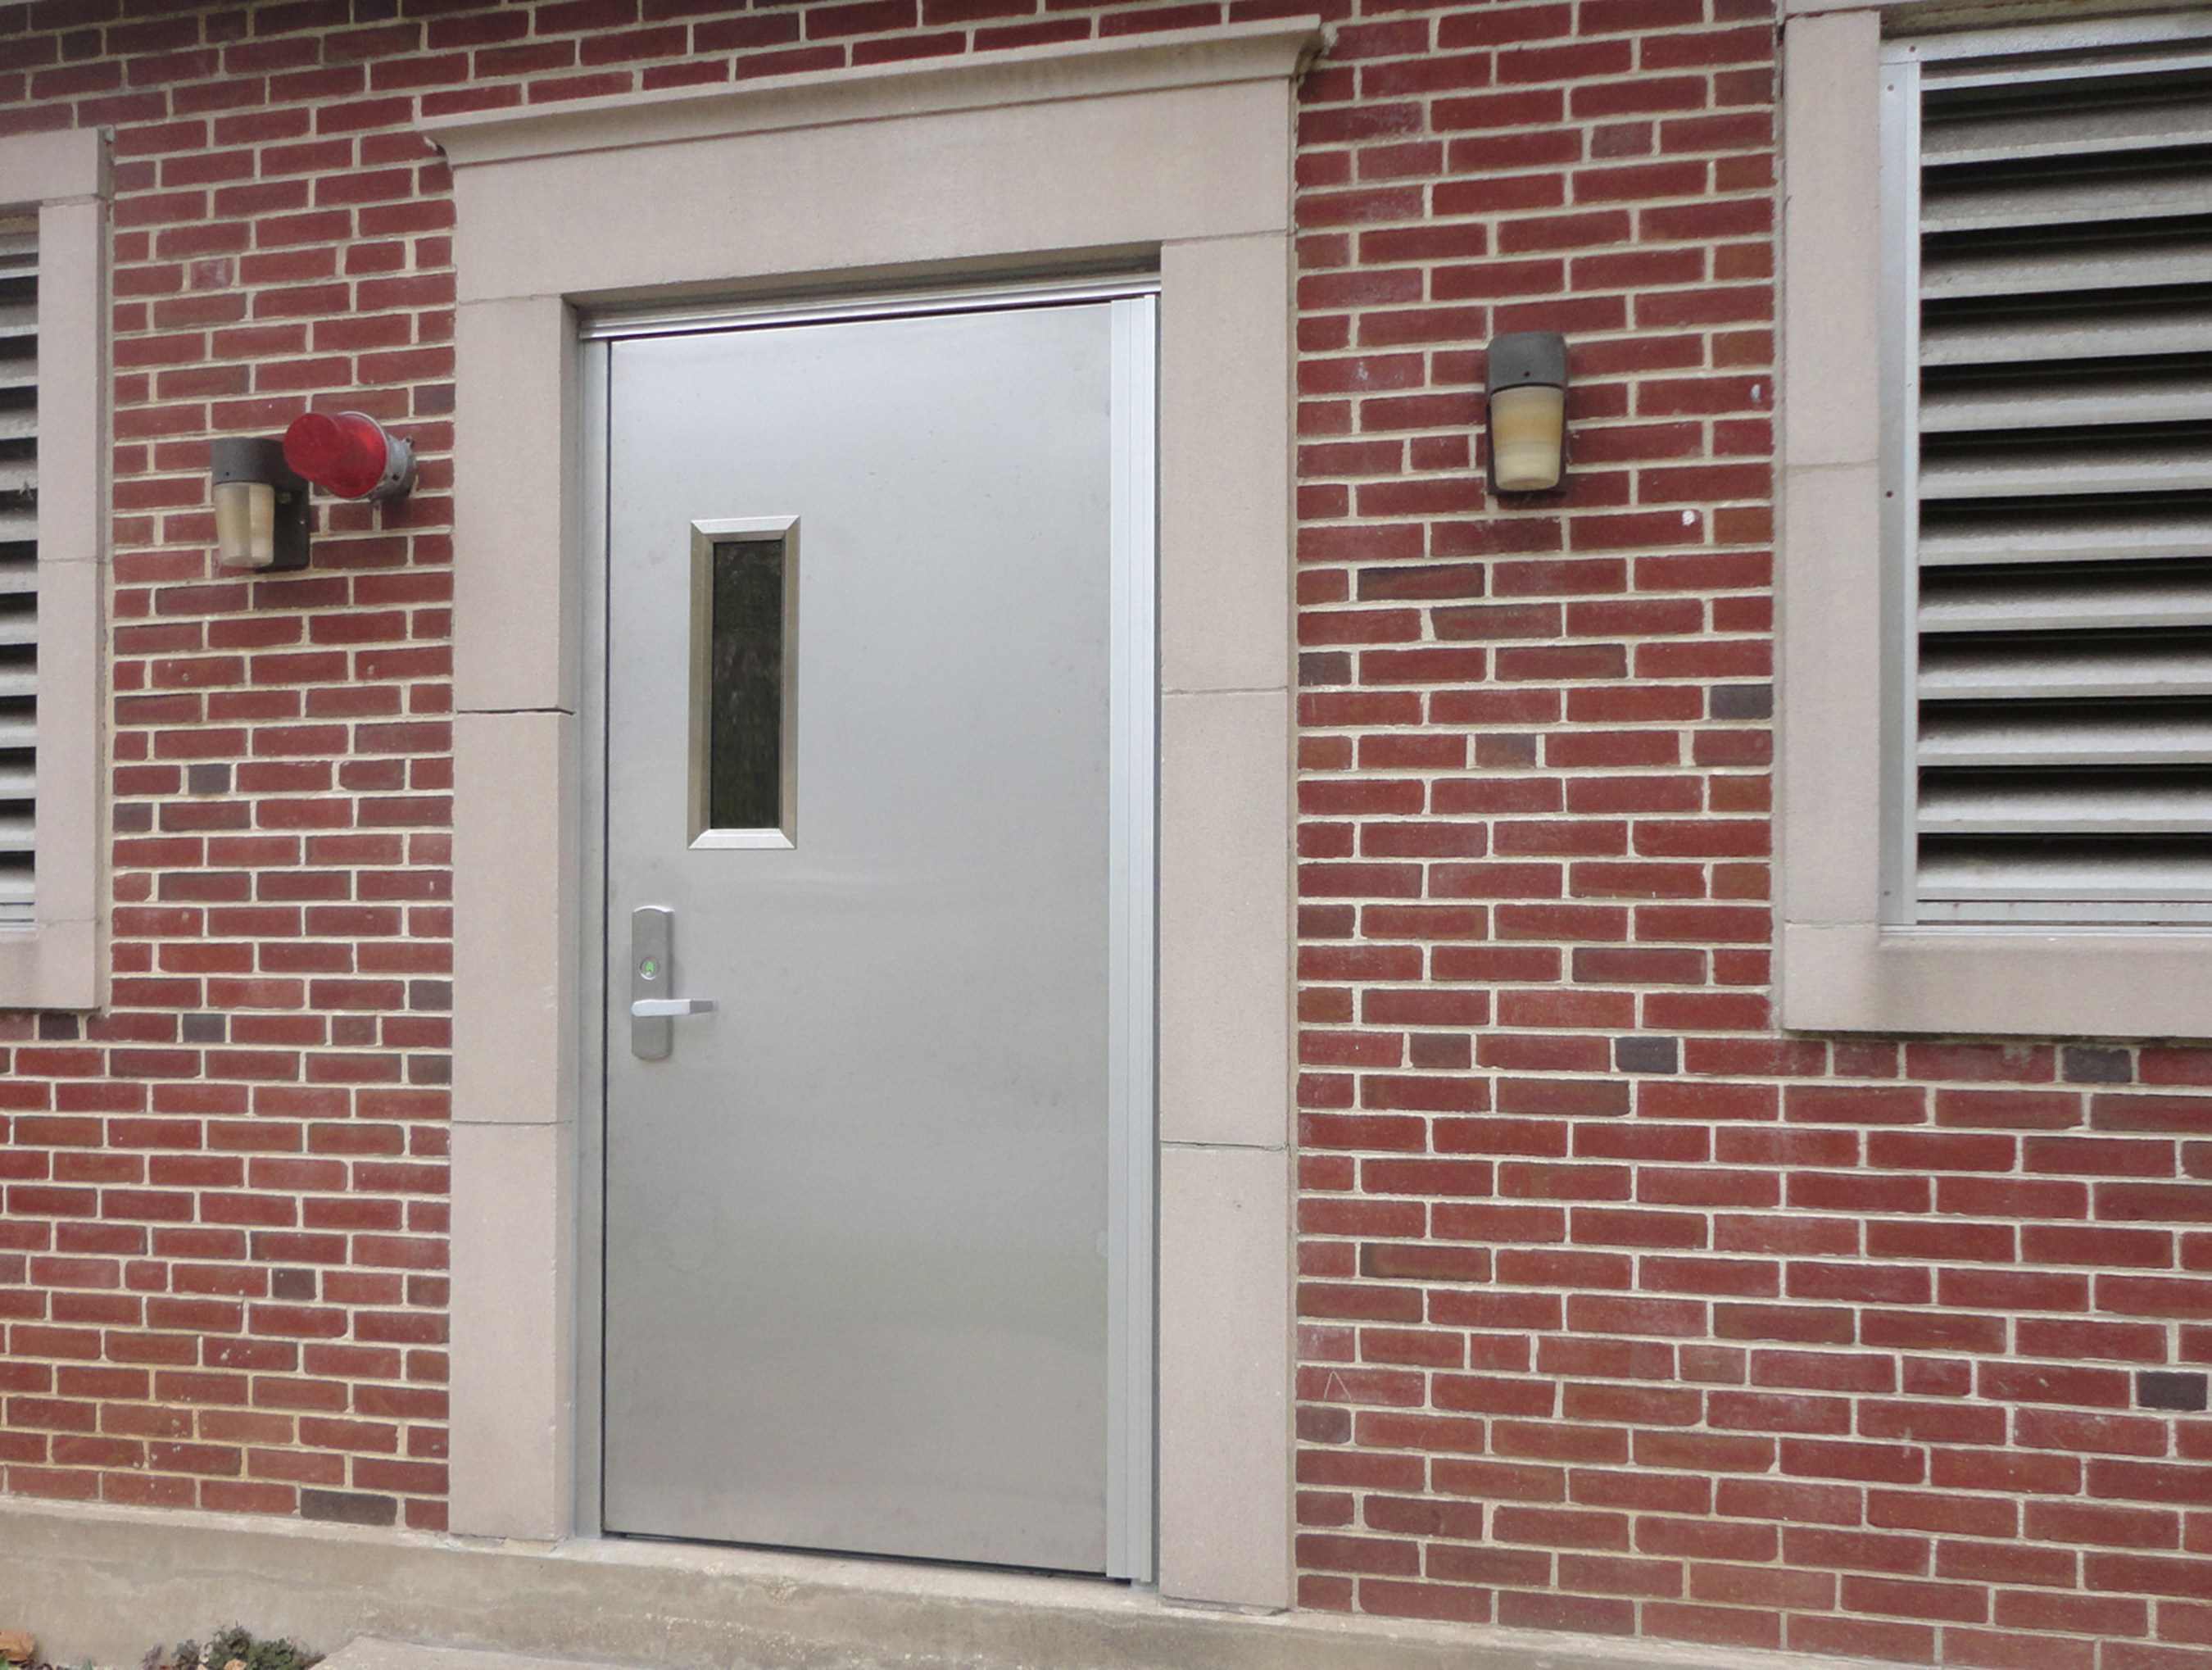 The PD-522FFR is a dual-protection fire rated flood door, specifically engineered for interior and exterior openings requiring watertight flood protection and a 90-minute fire rating.